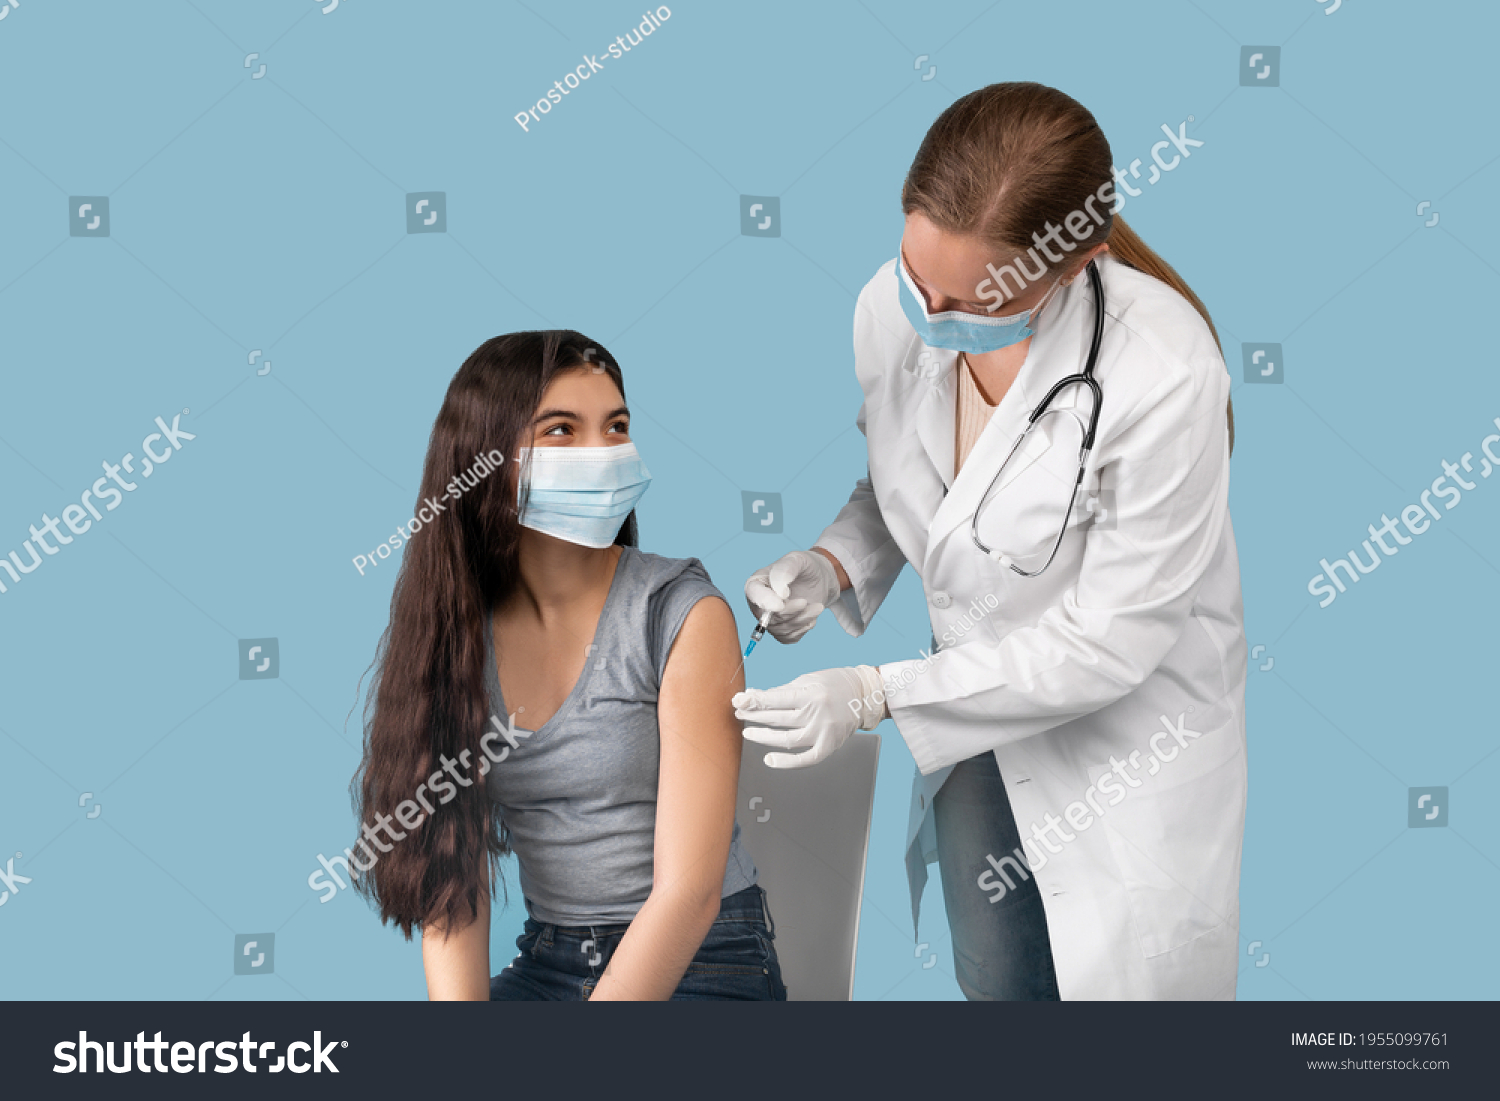 Medical doctor or nurse giving coronavirus vaccine shot to Indian teen girl over blue studio background. Female teenager in face mask getting covid-19 vaccine, participating in immunization campaign #1955099761